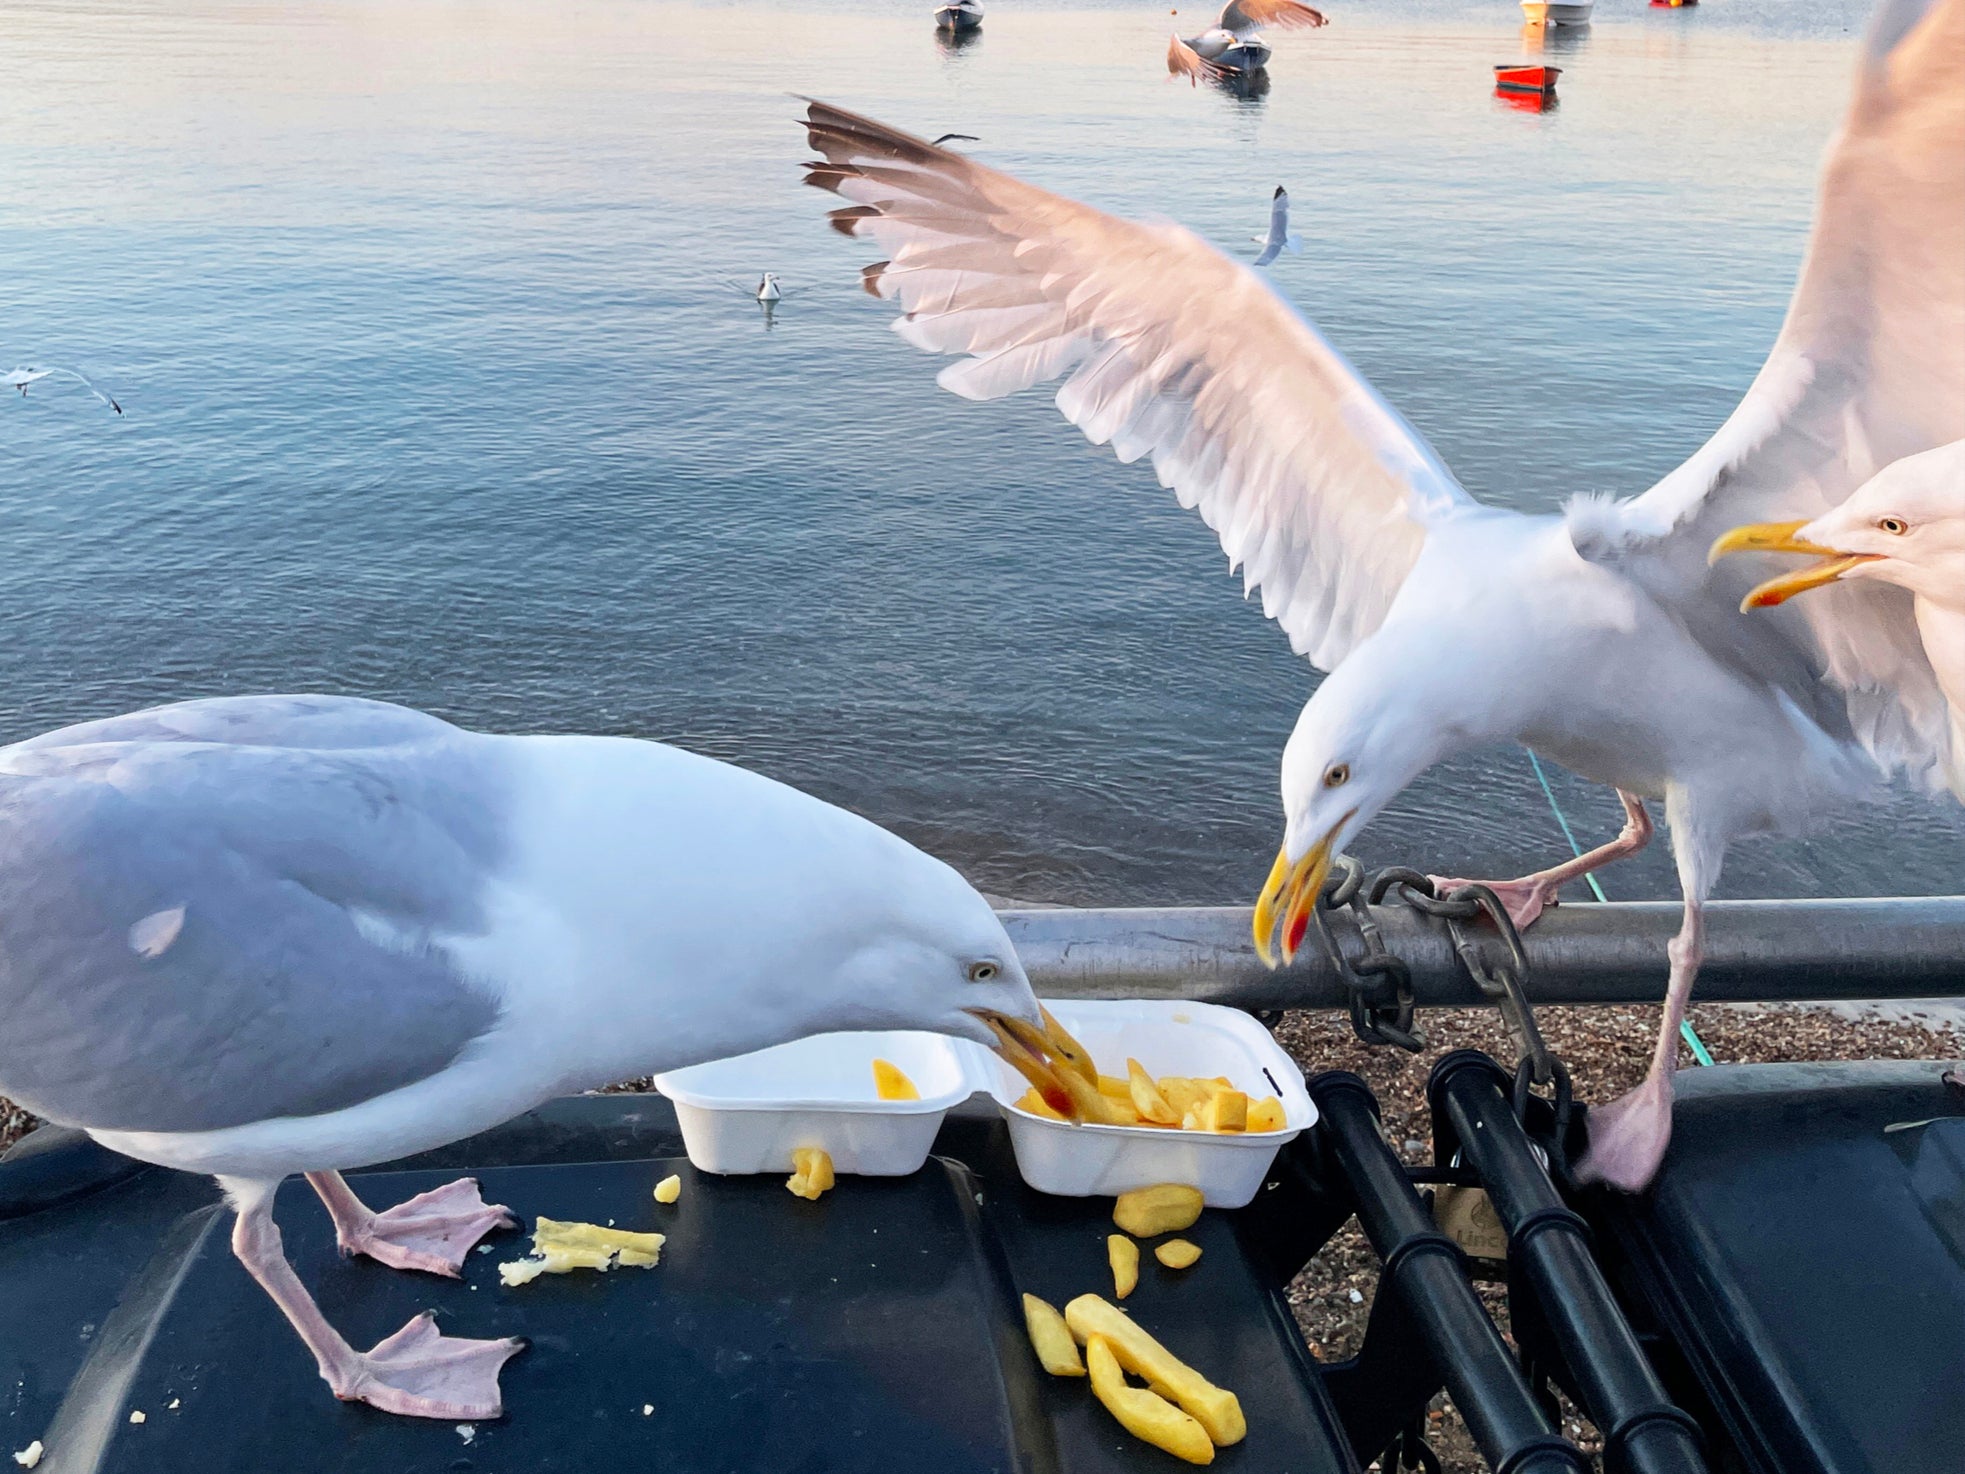 Gone gull: Climate crisis taking toll on seabird numbers, as more